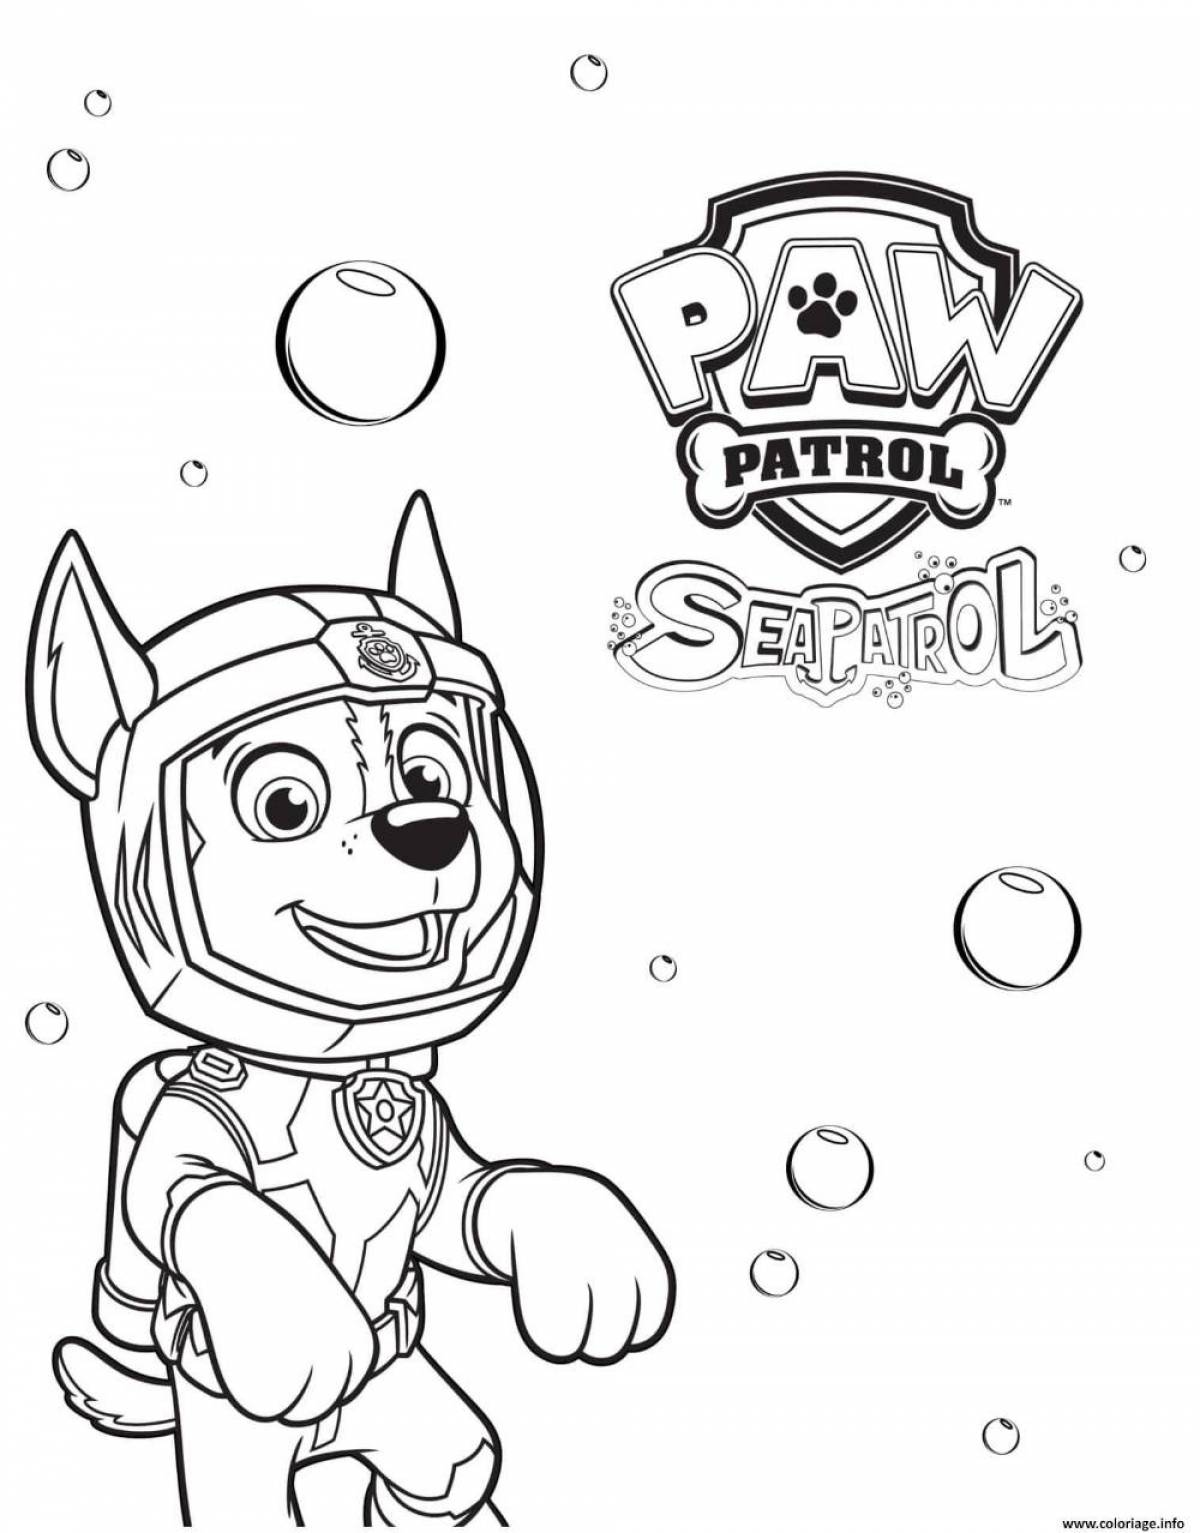 Paw patrol racer fine coloring